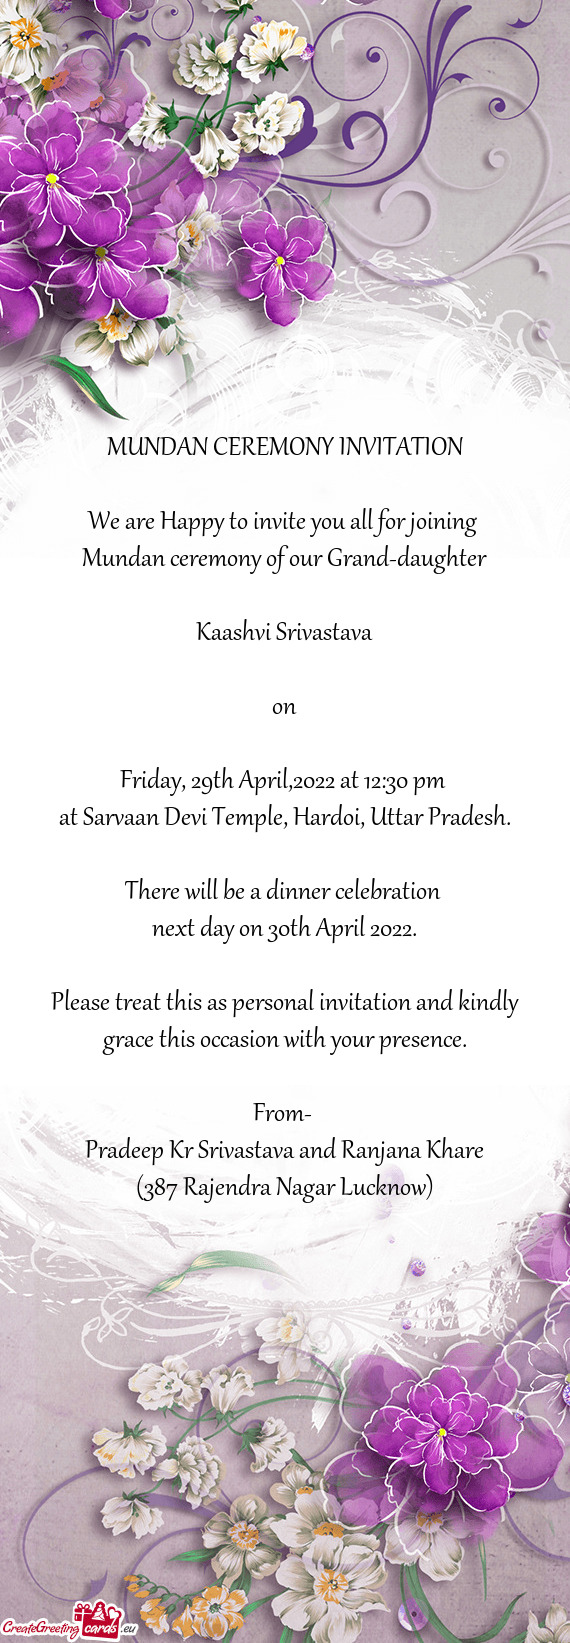 Mundan ceremony of our Grand-daughter